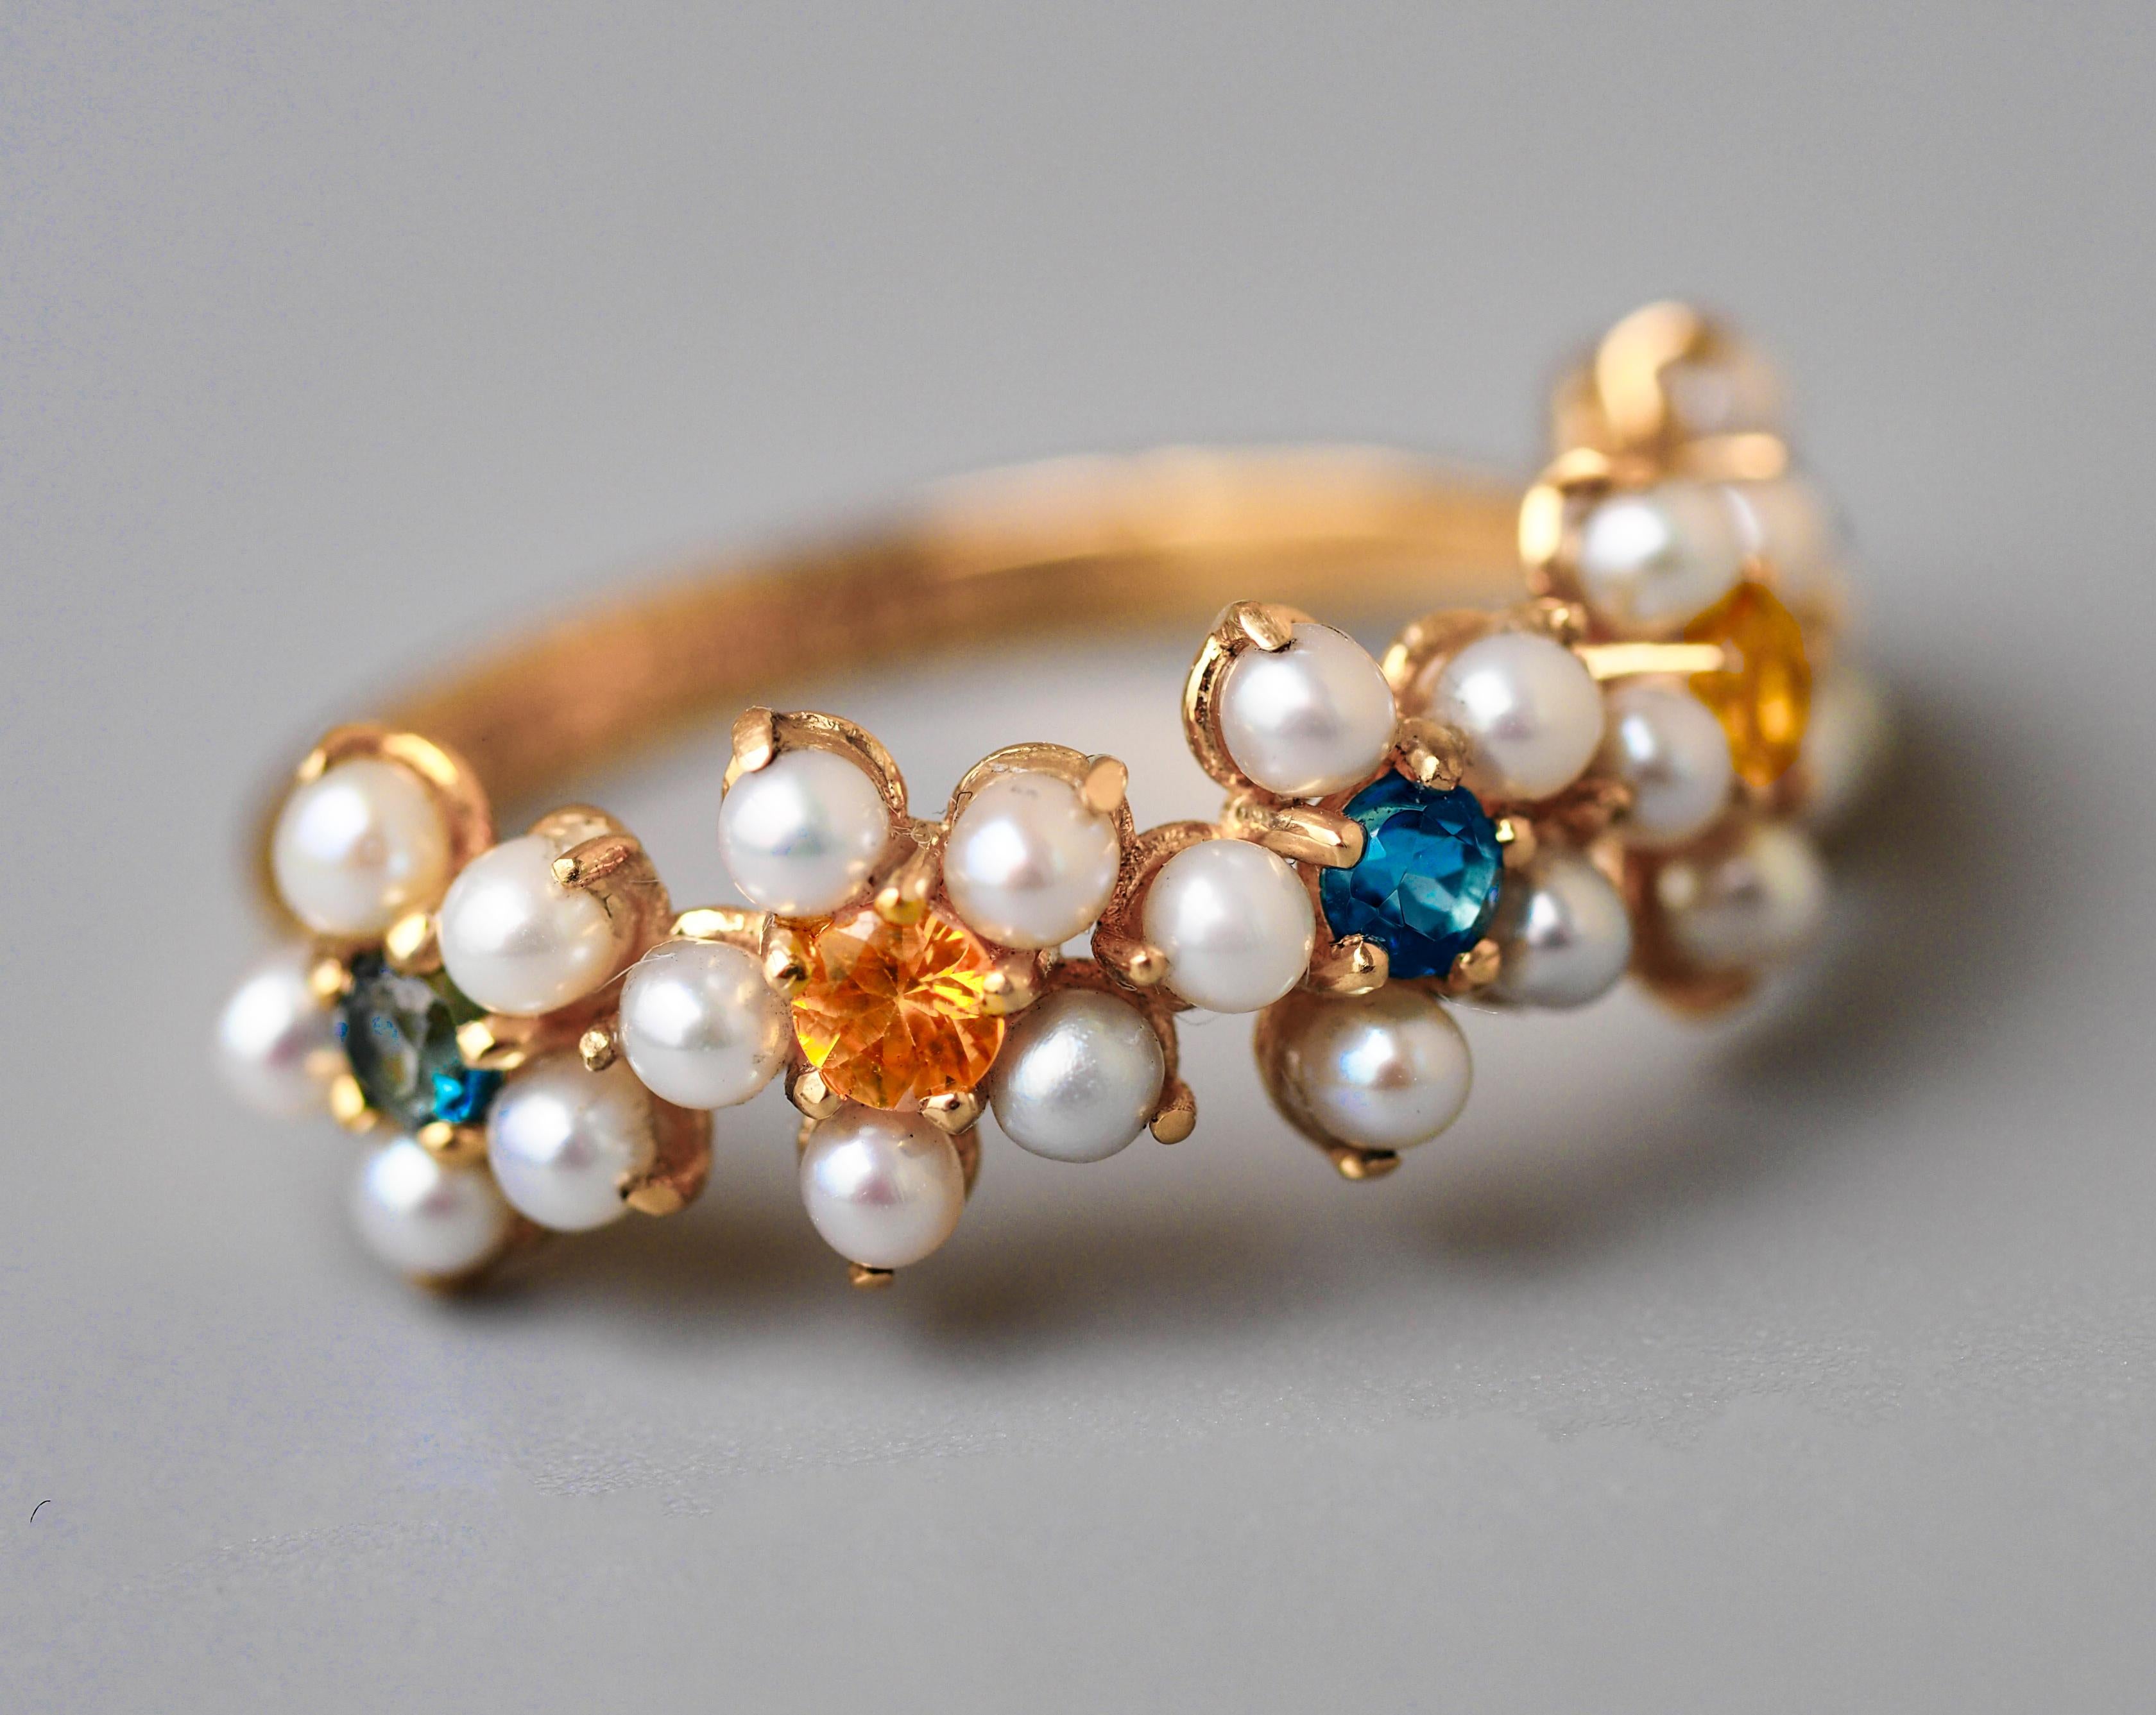 For Sale:  14k Gold Ring with Pearls and Sapphires 12